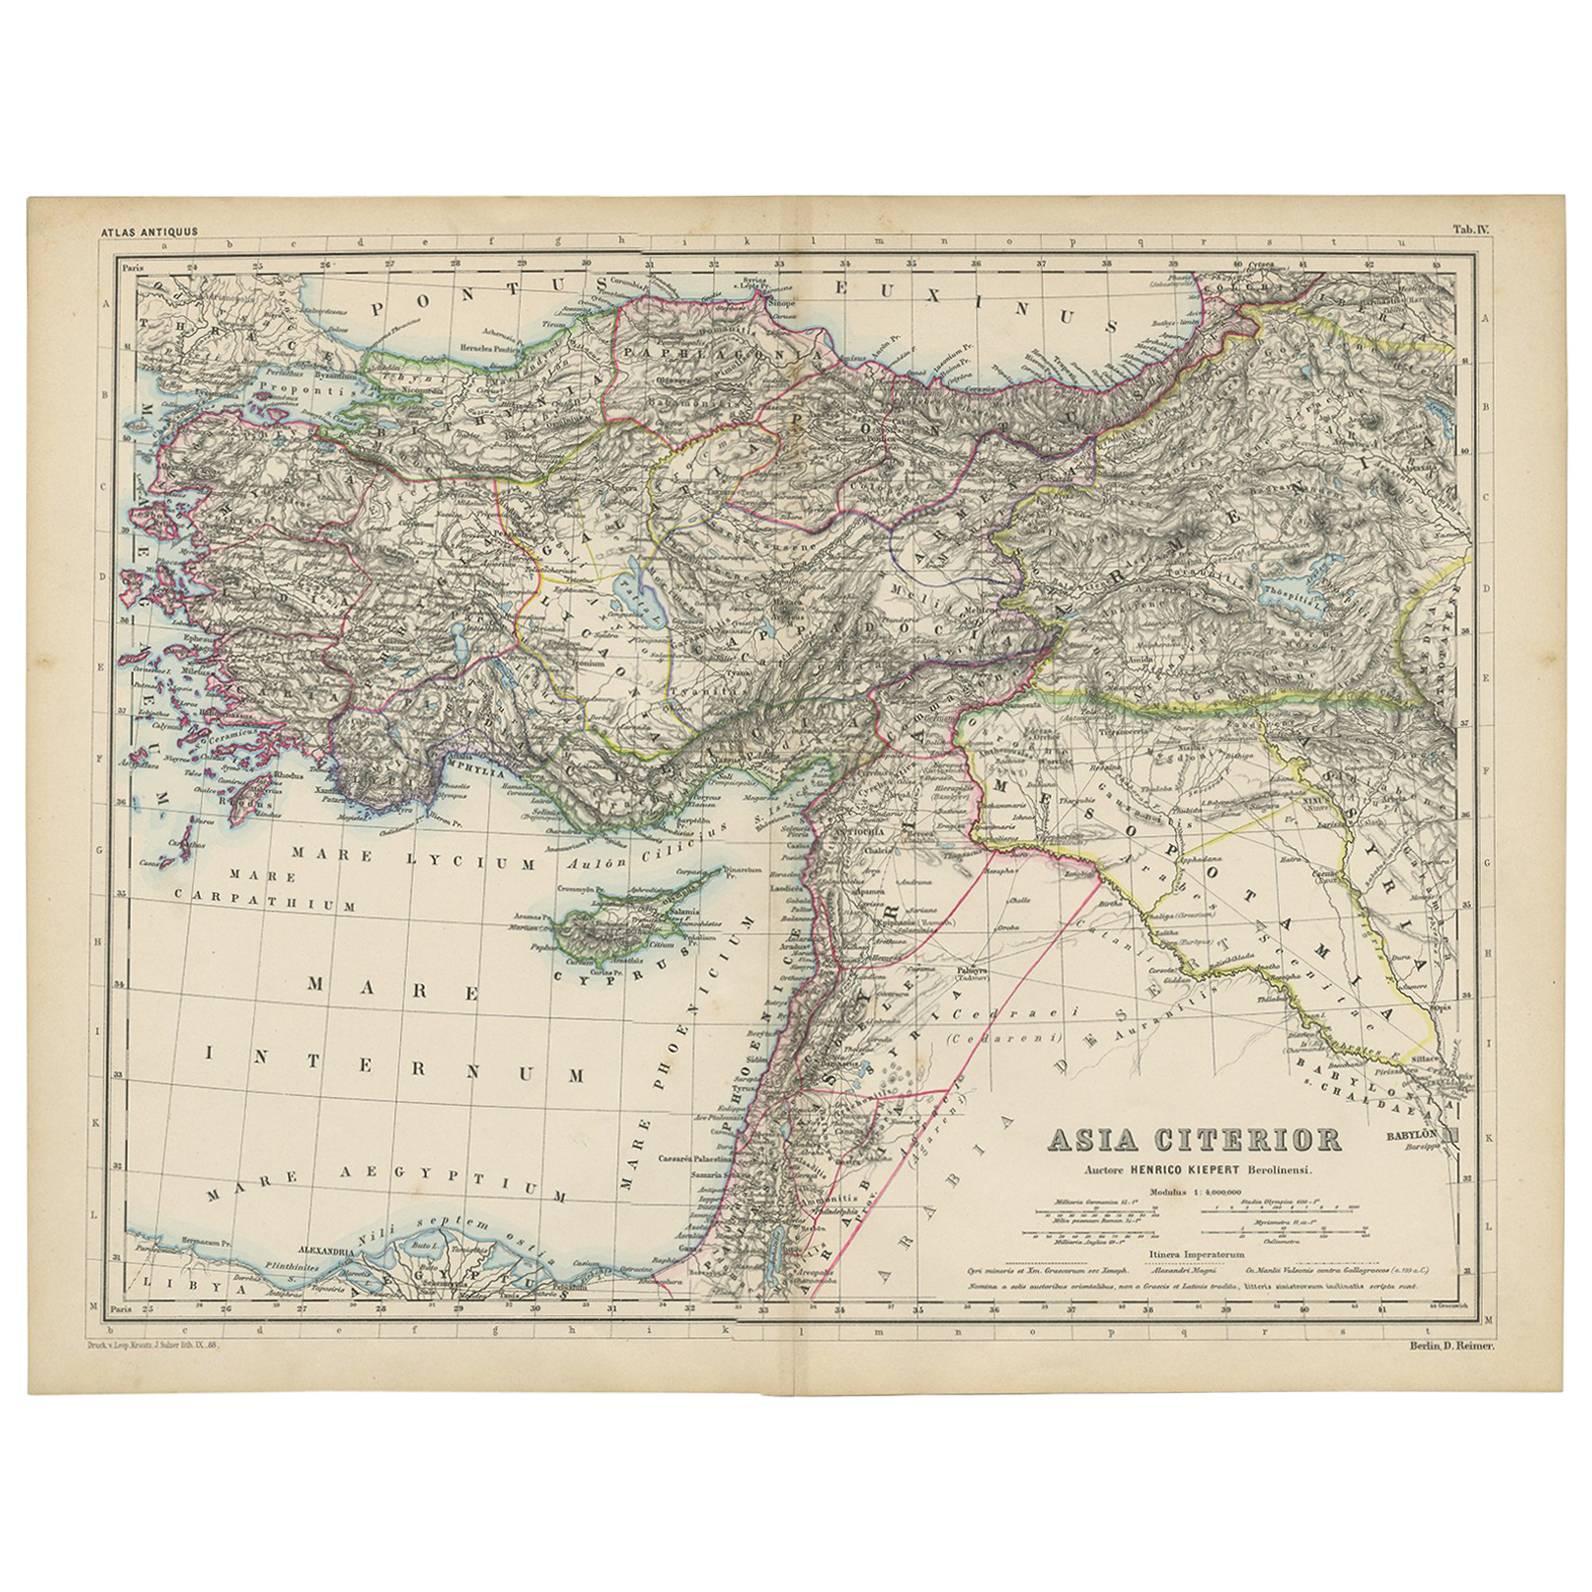 Antique Map of the Middle East by H. Kiepert, circa 1870